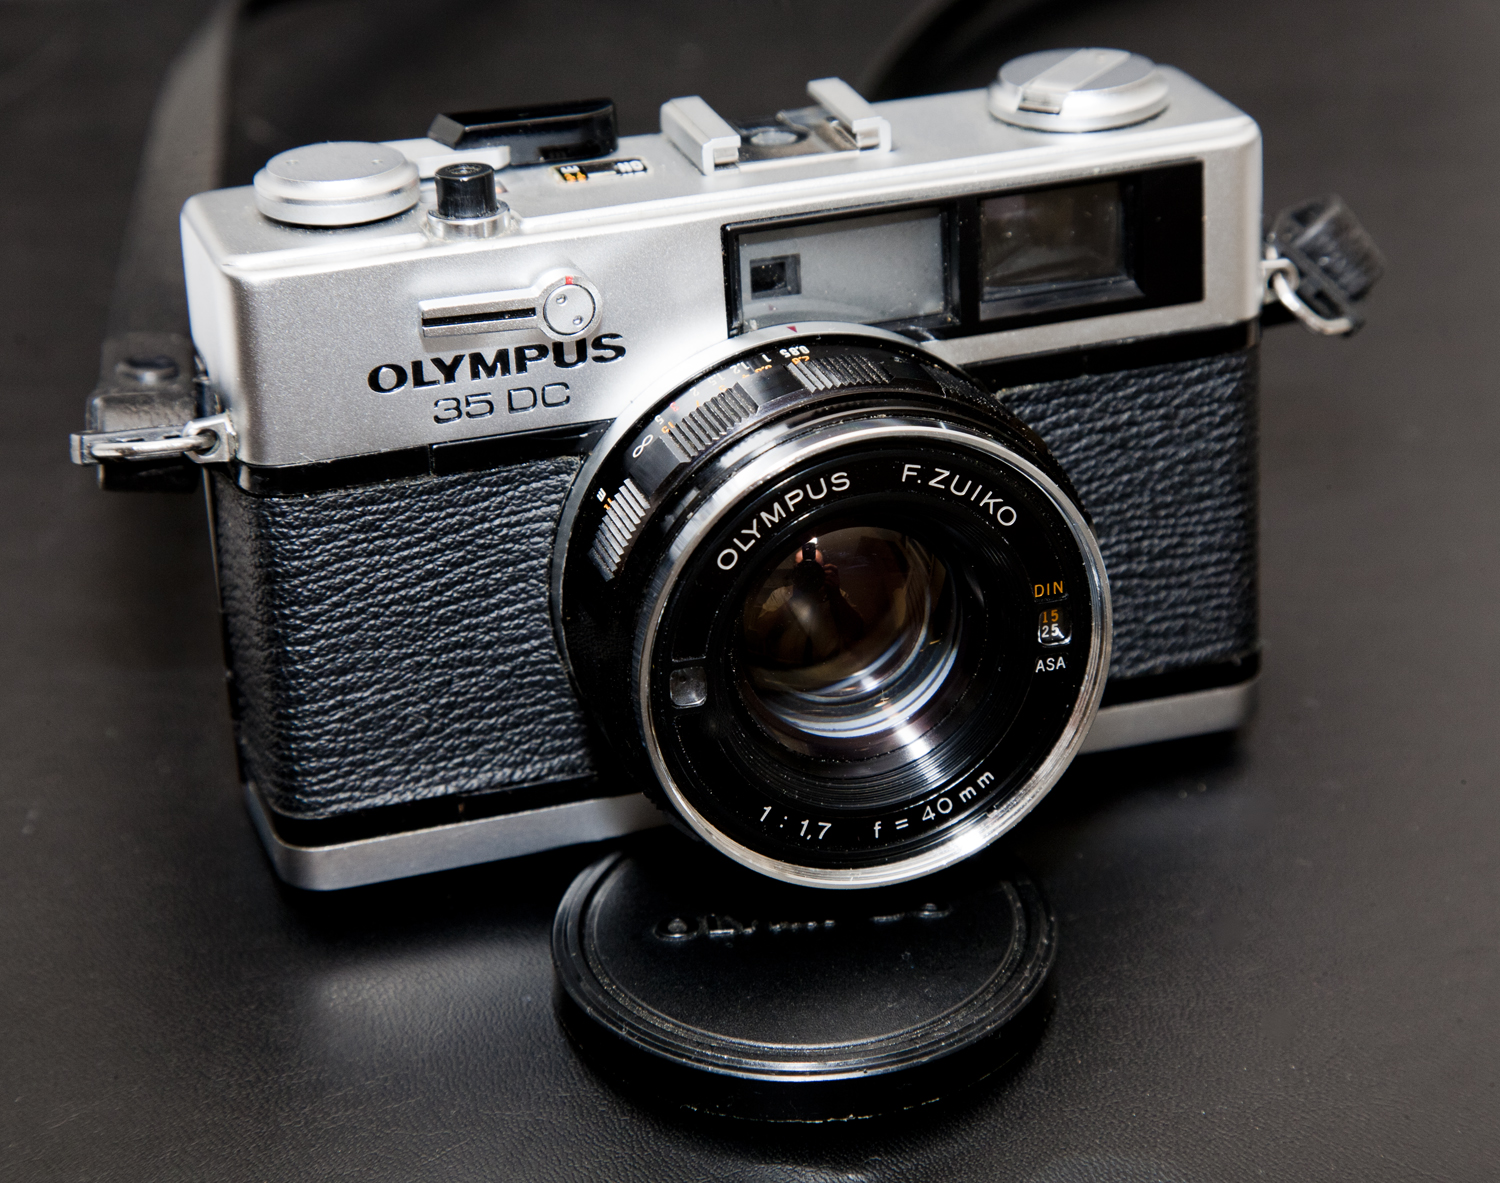 It's been a long time coming – the Olympus 35 DC | The